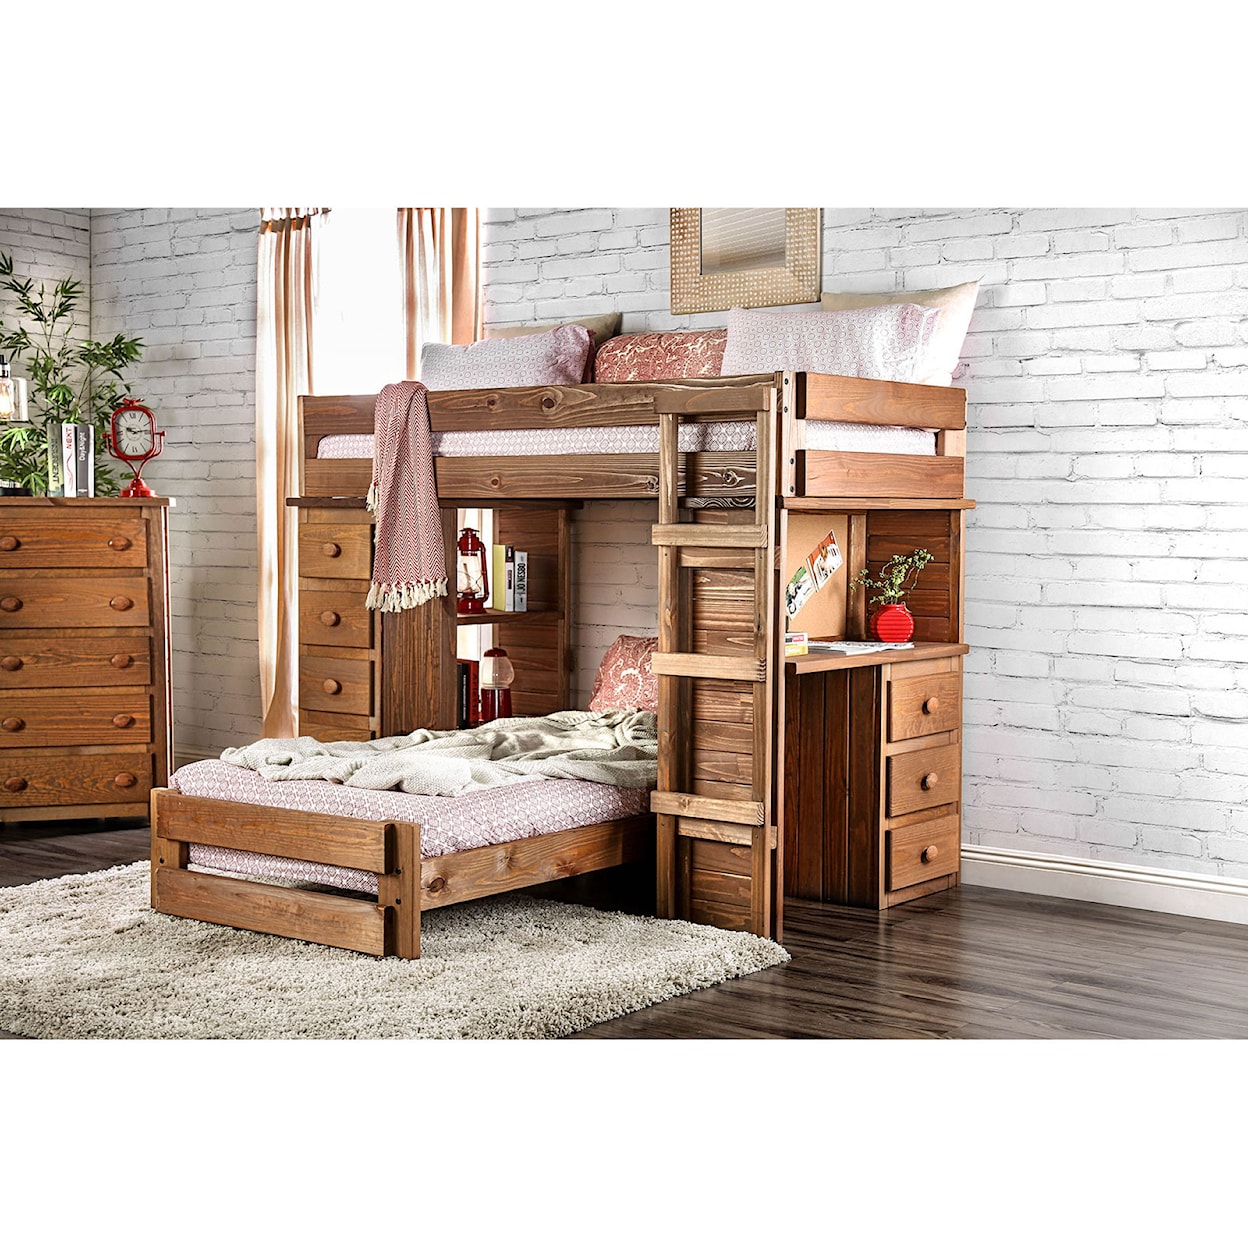 Furniture of America Eileen Twin Over Twin Loft Bed